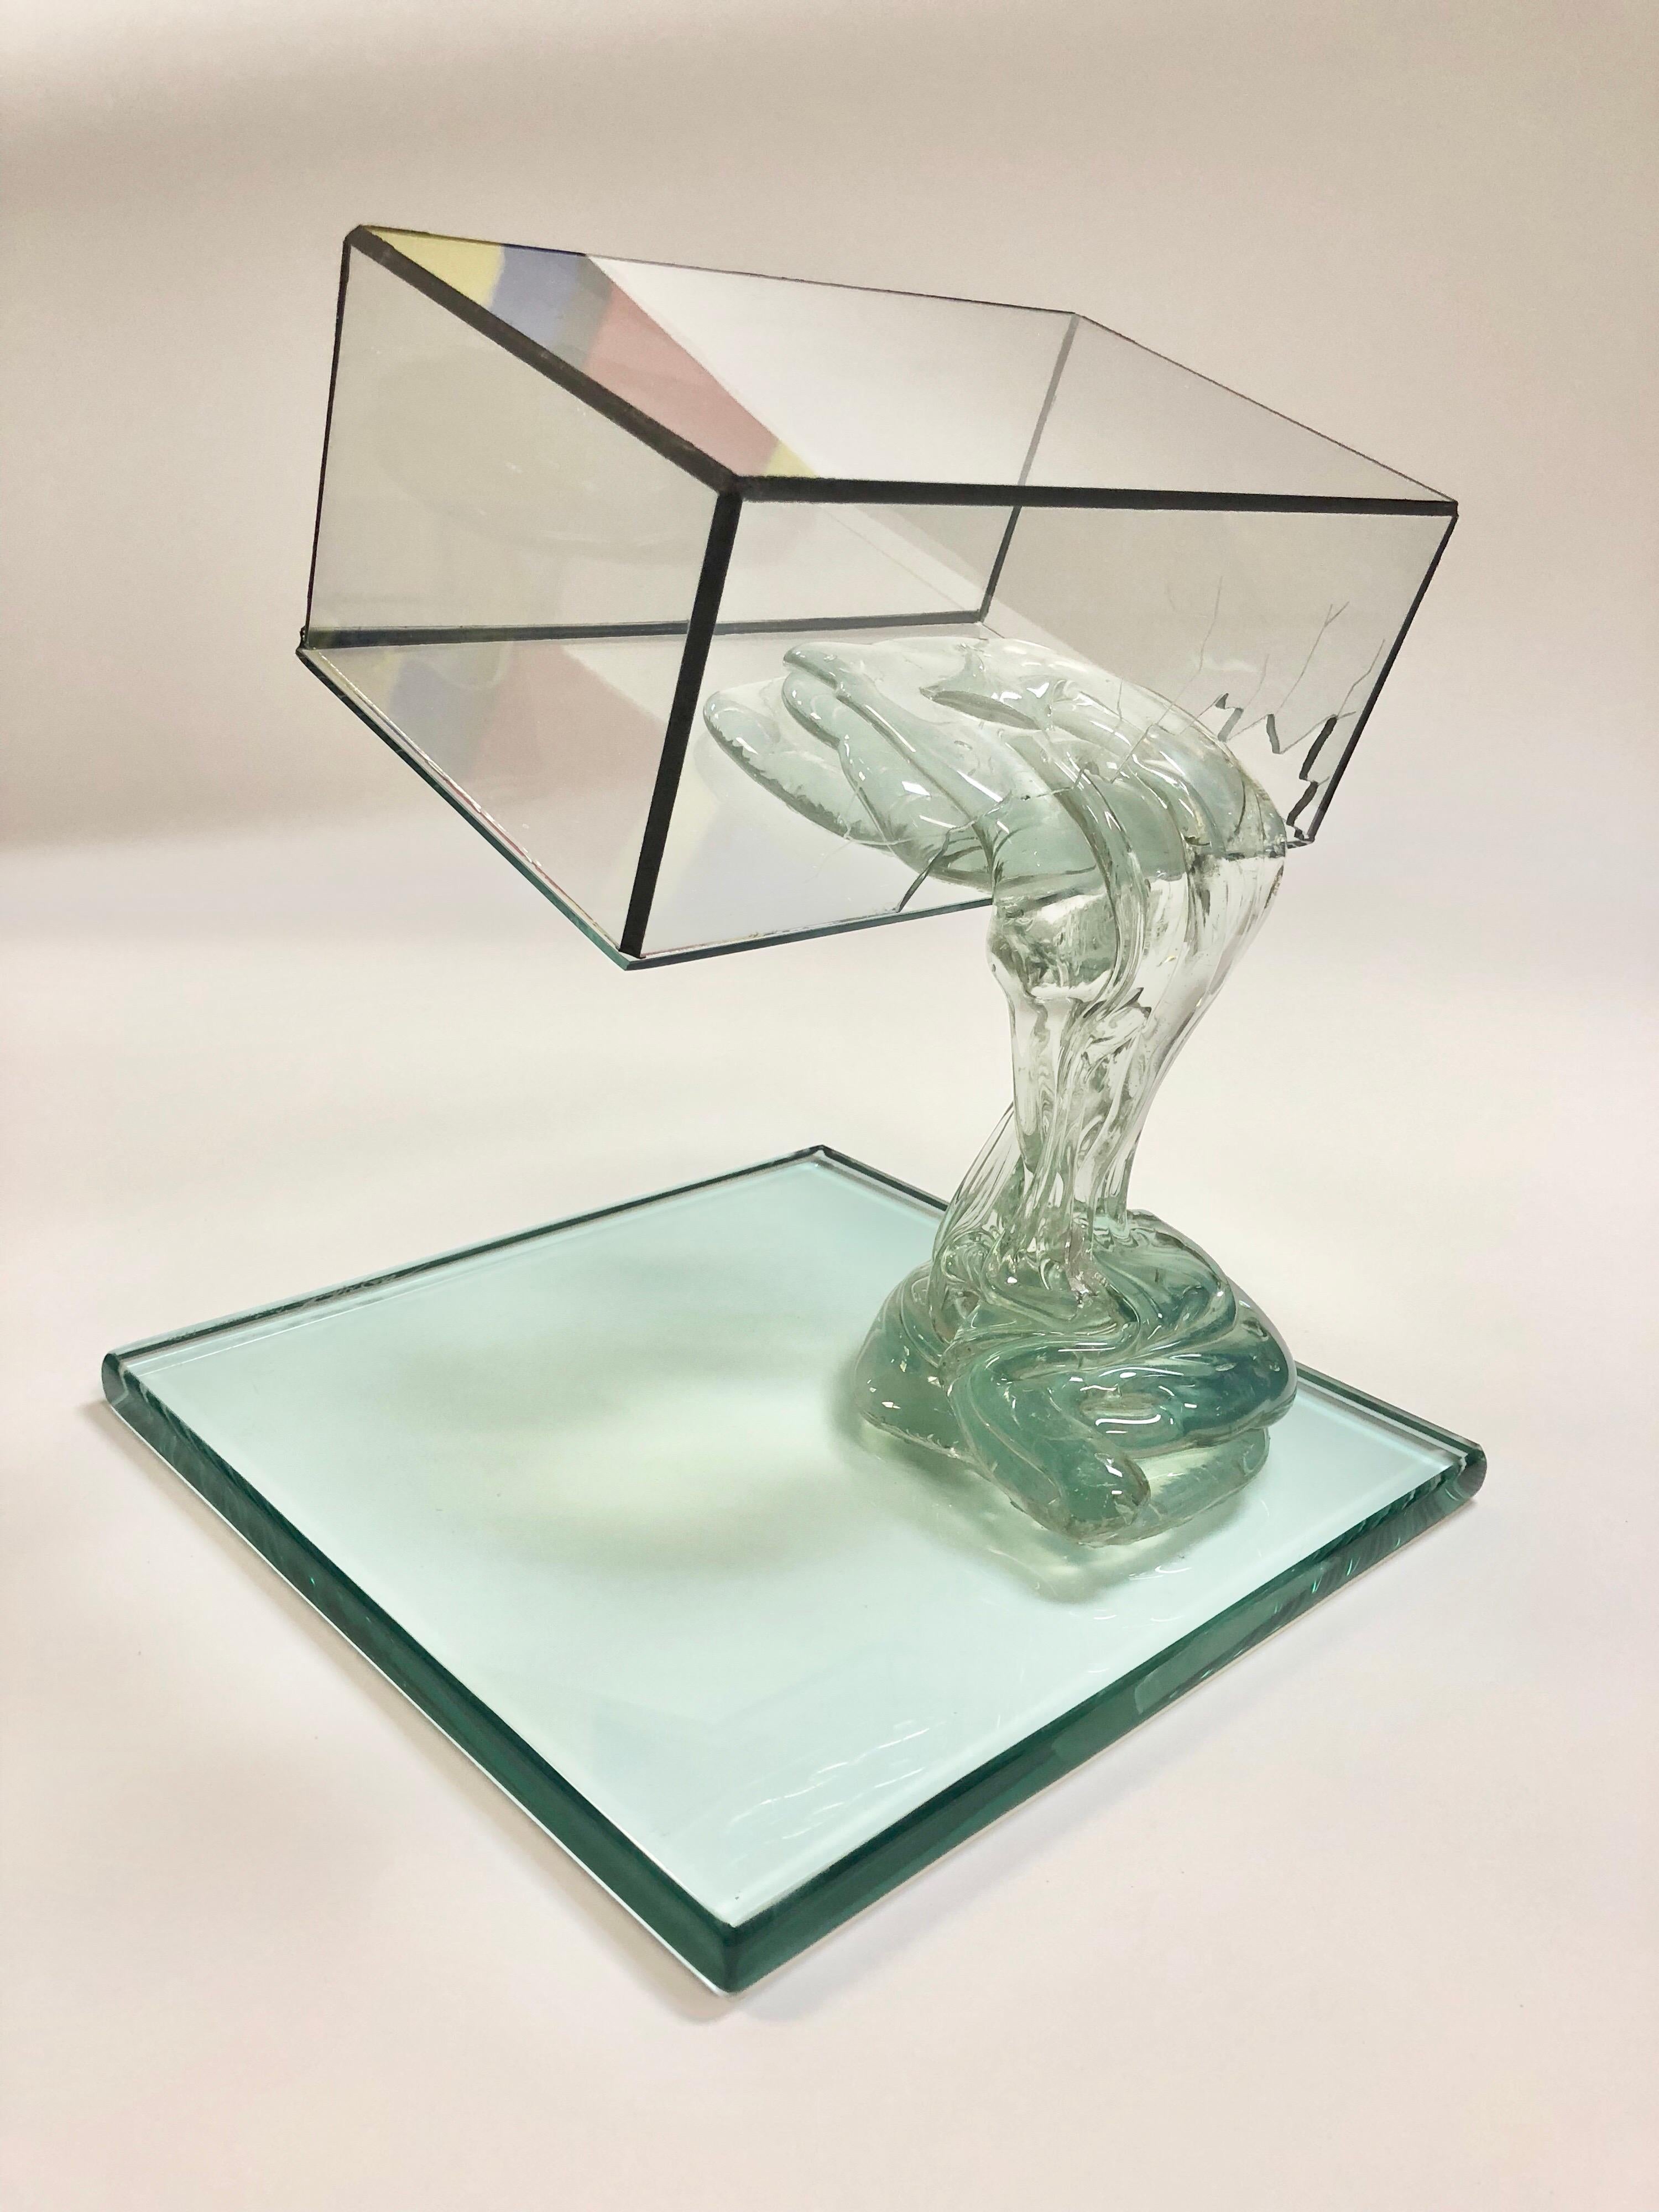 An all glass sculpture by master glass artist Drew Smith. Quite interesting, a liquid seems to spill from the broken box onto a lower surface.

Smith graduated with his B.A. from Ashland University in Ohio. He learned glass making from Henry Halem